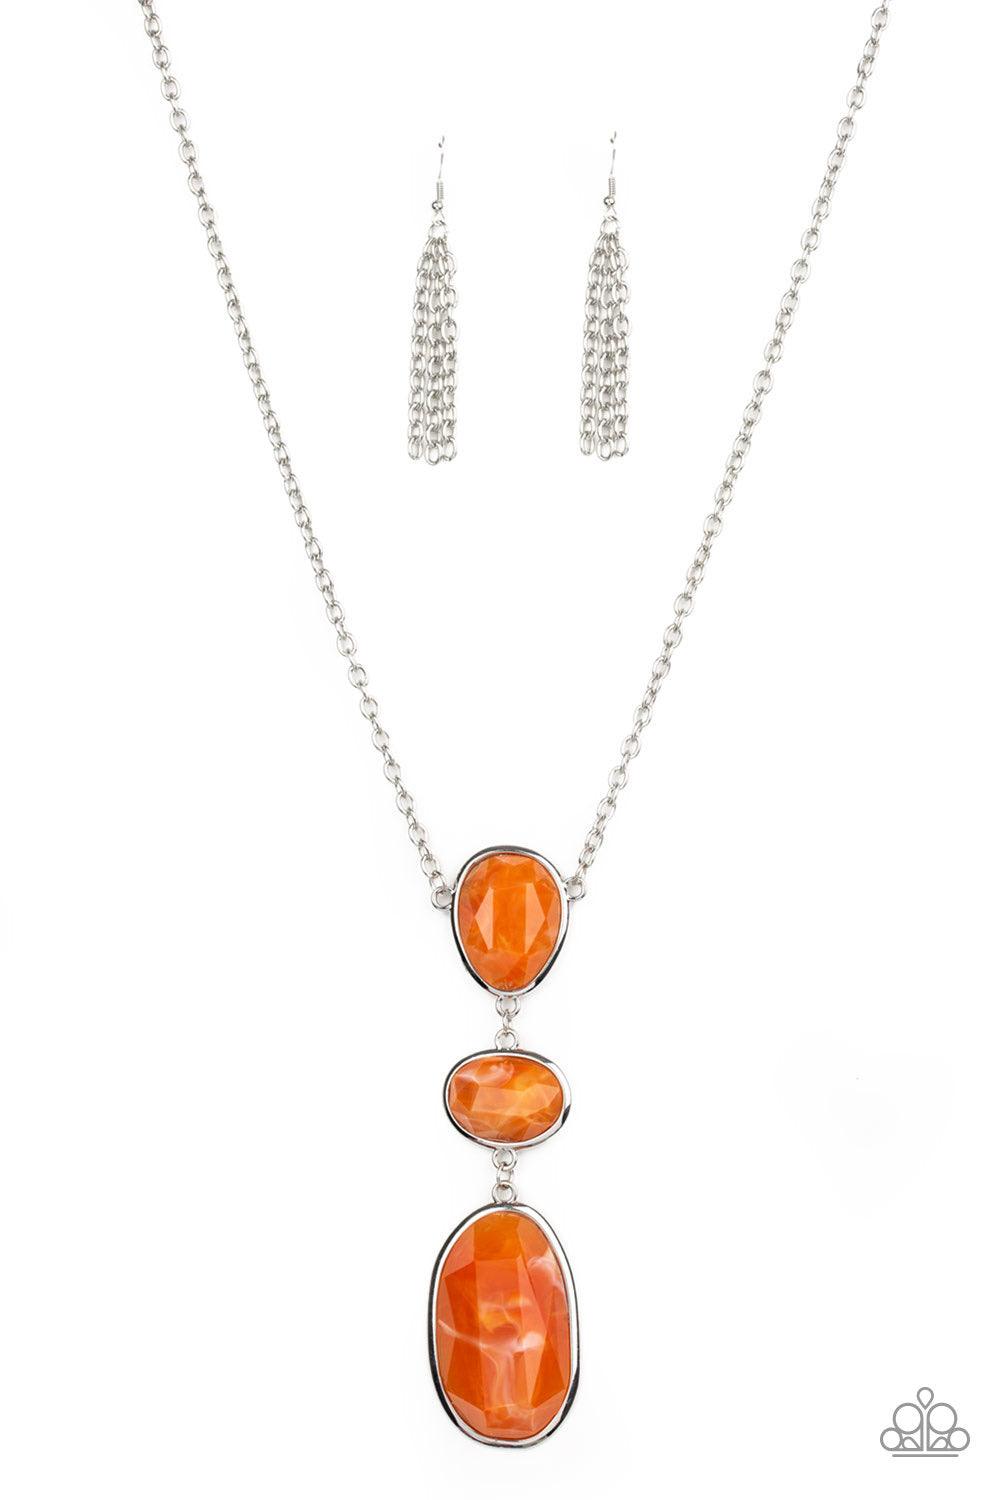 Paparazzi Accessories Making An Impact - Orange Featuring a colorful marble-like finish, three mismatched Orange Tiger acrylic frames link down the chest for a dramatic effect. Features an adjustable clasp closure. Color may vary. Jewelry